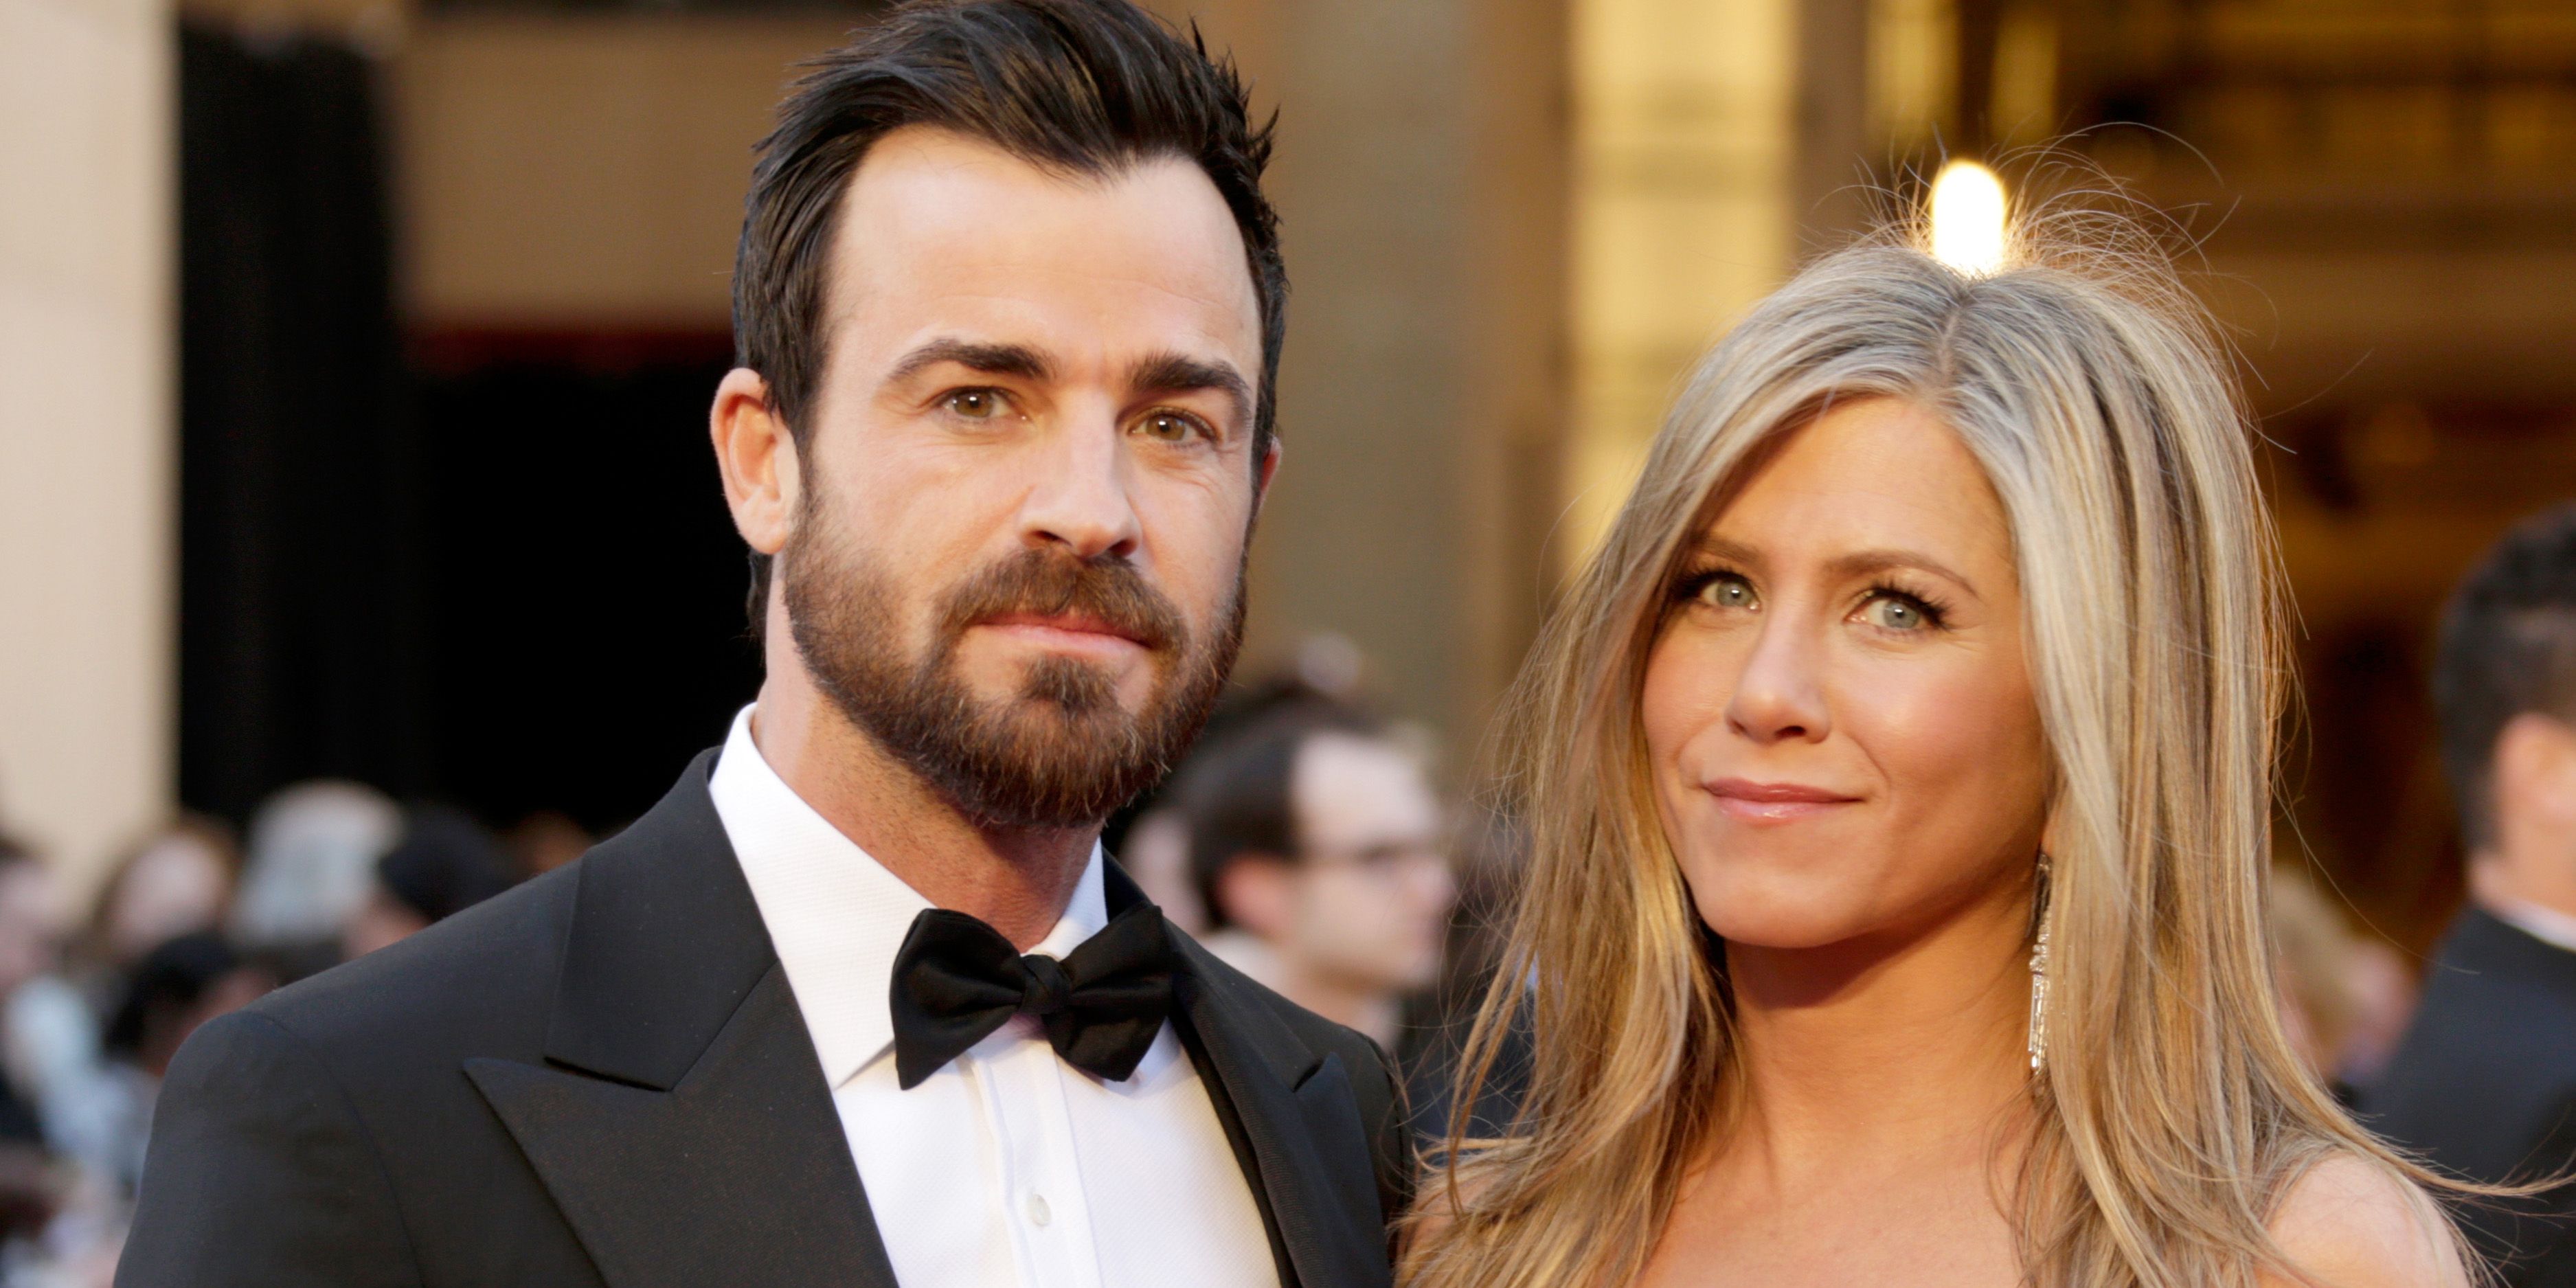 Justin theroux dating who 2018 is Who is